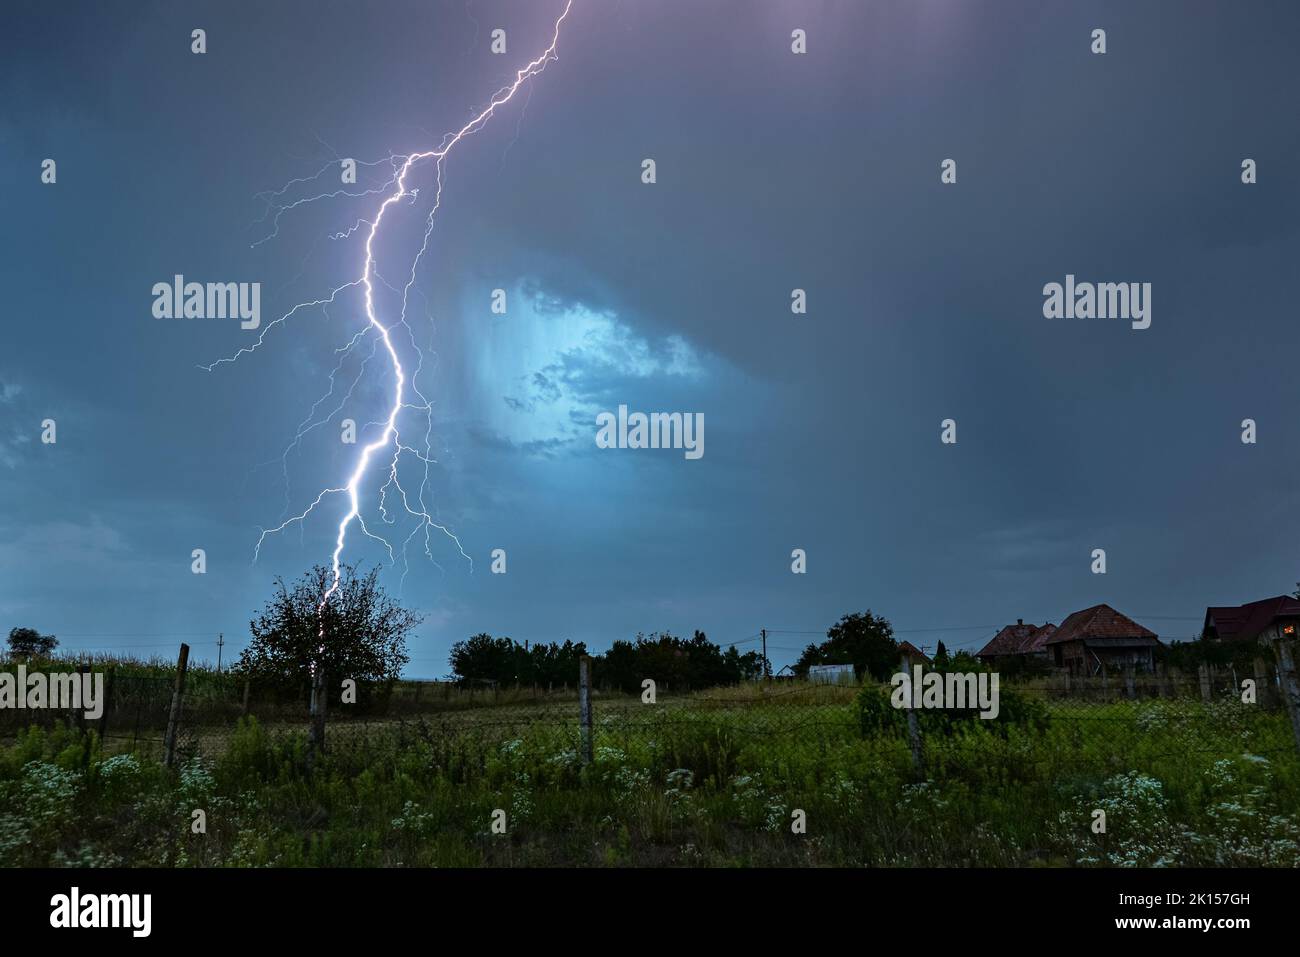 Powerful branched thunderbolt of lightning strikes down in an idyllic countryside Stock Photo